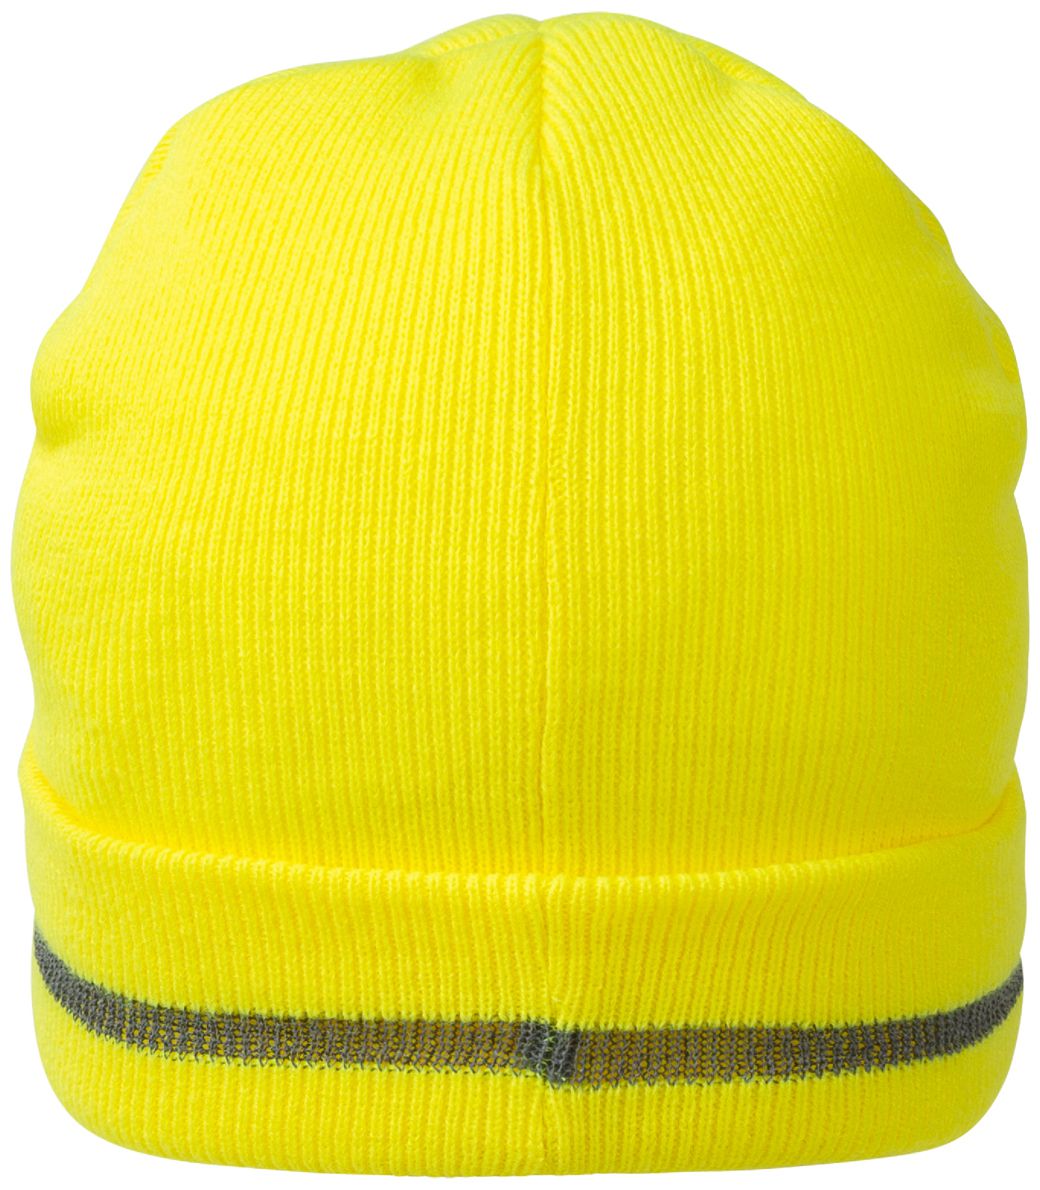 NITRAS KIDS winter beanie - knitted beanie for kids - warm & soft lined beanie for boys & girls